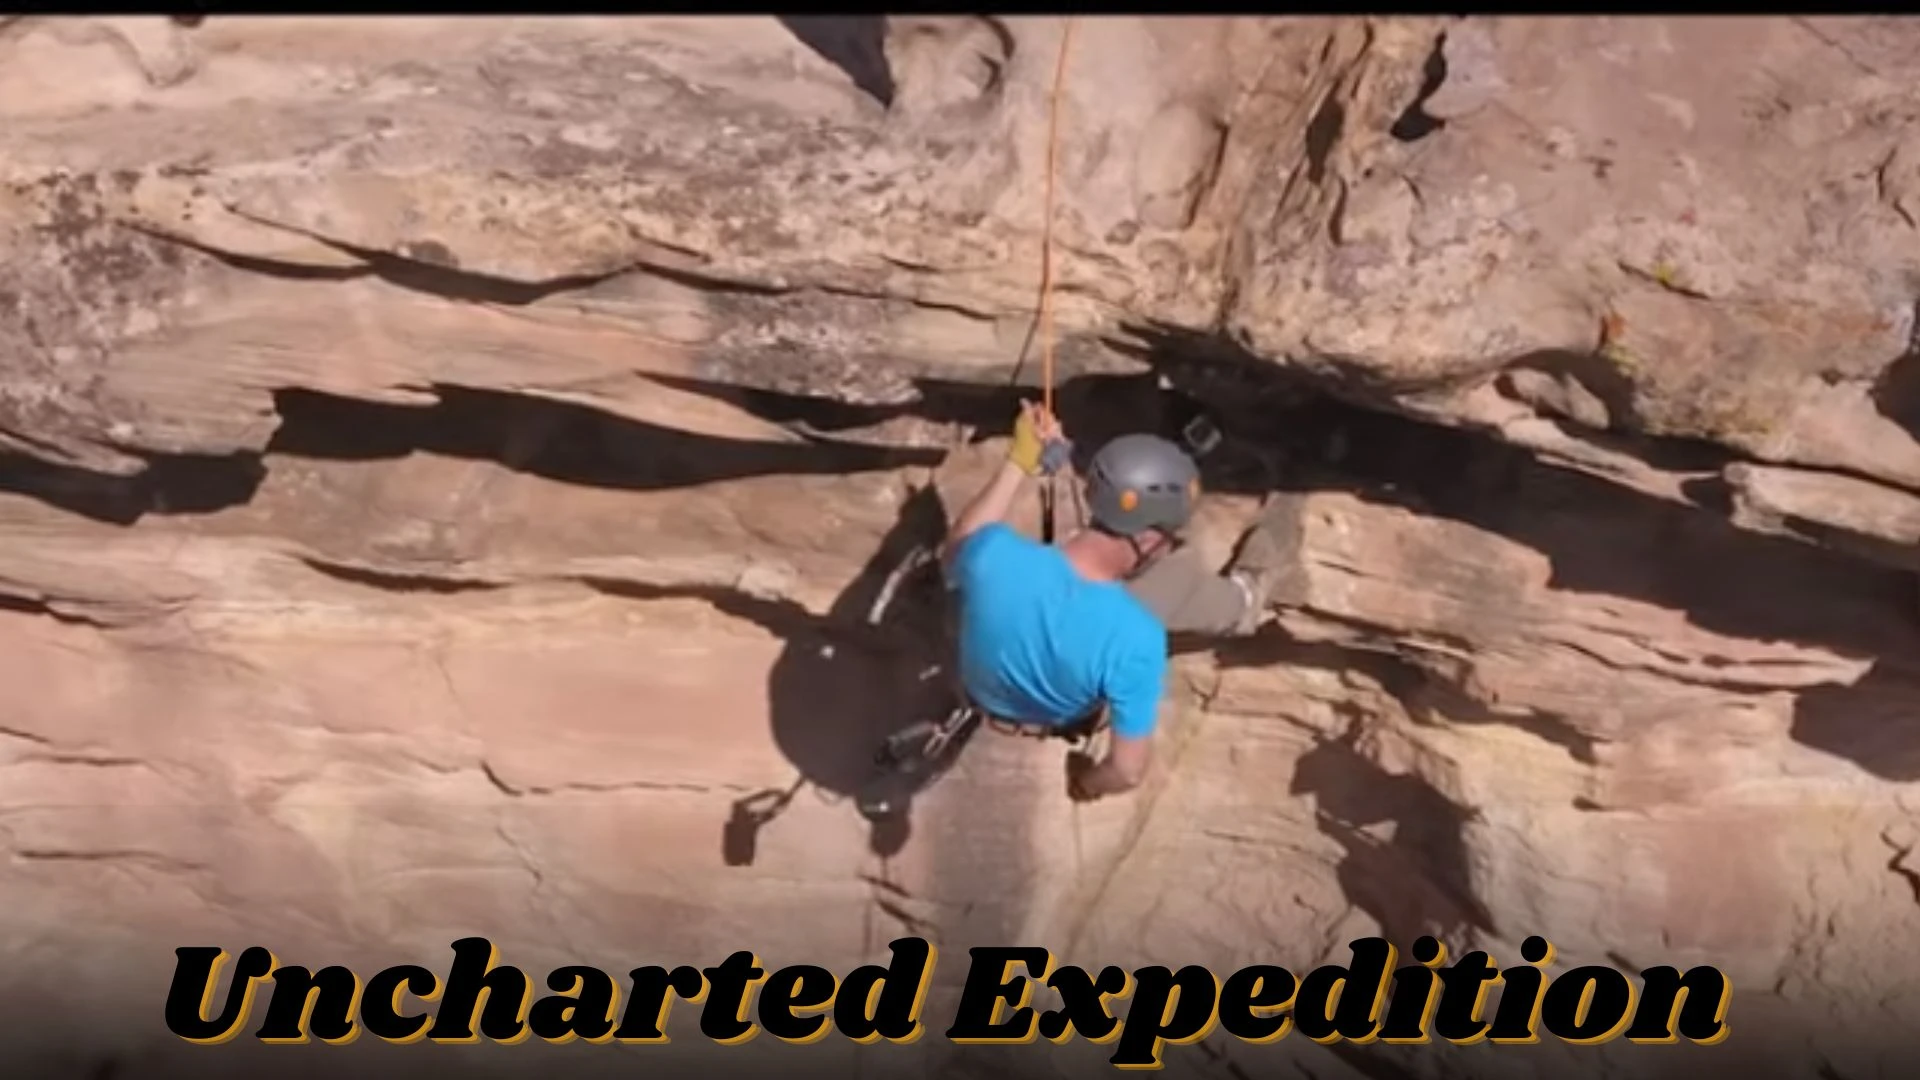 Uncharted Expedition Parents Guide and Age Rating (2022)